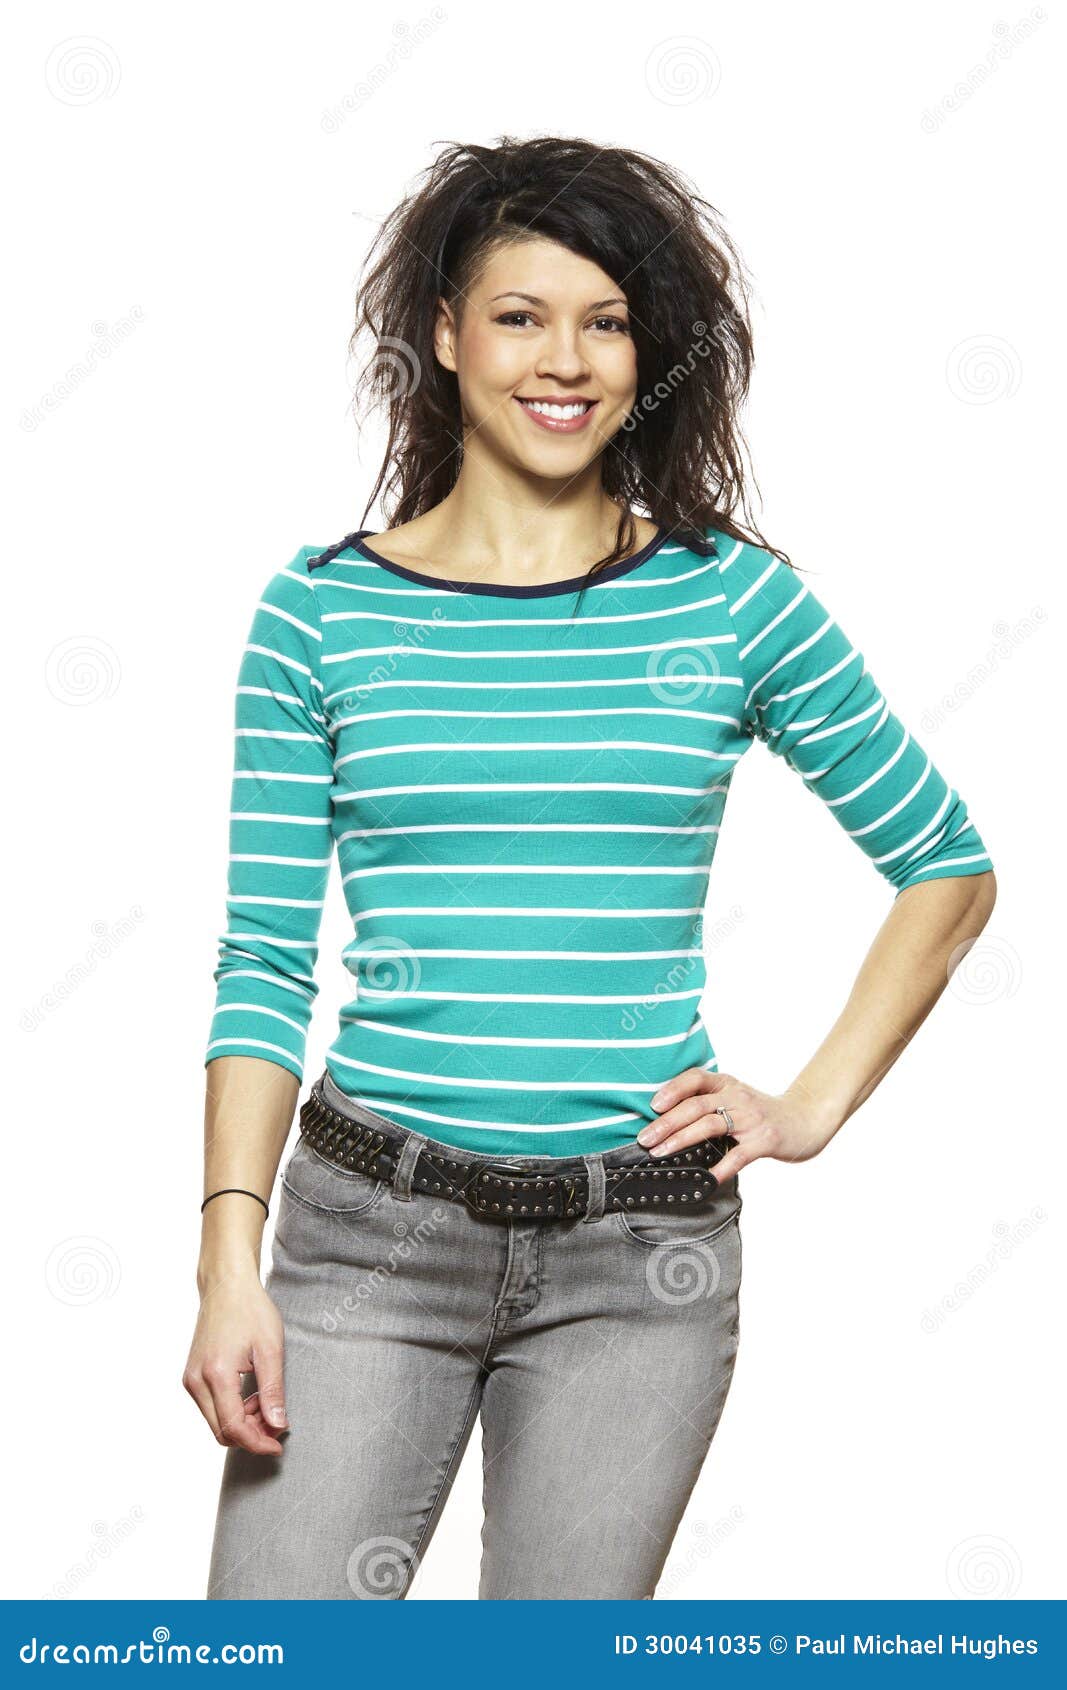 casually dressed young woman smiling